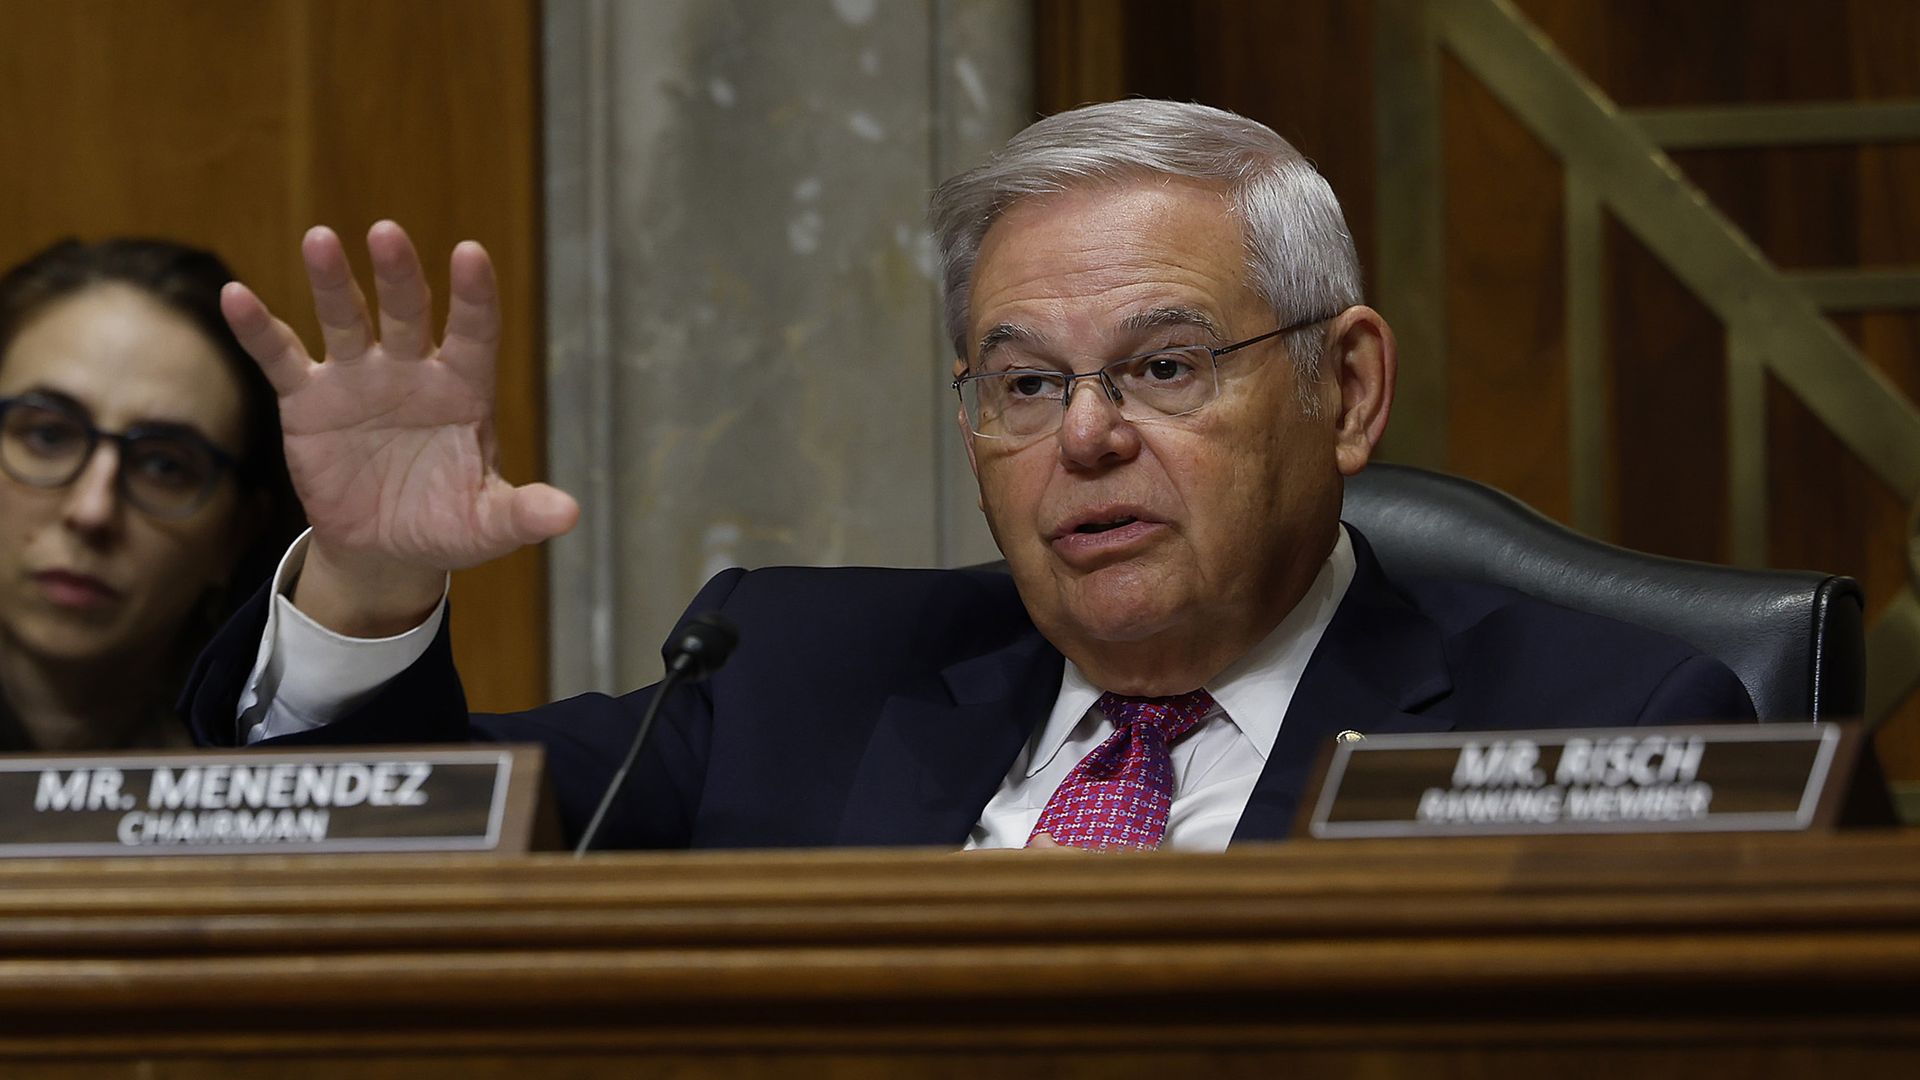 : Senate Foreign Relations Committee Chairman Robert Menendez (D-NJ) questions witnesses about the ongoing war in Ukraine during a hearing in the Dirksen Senate Office Building on Capitol Hill on January 26, 2023 in Washington, DC. 